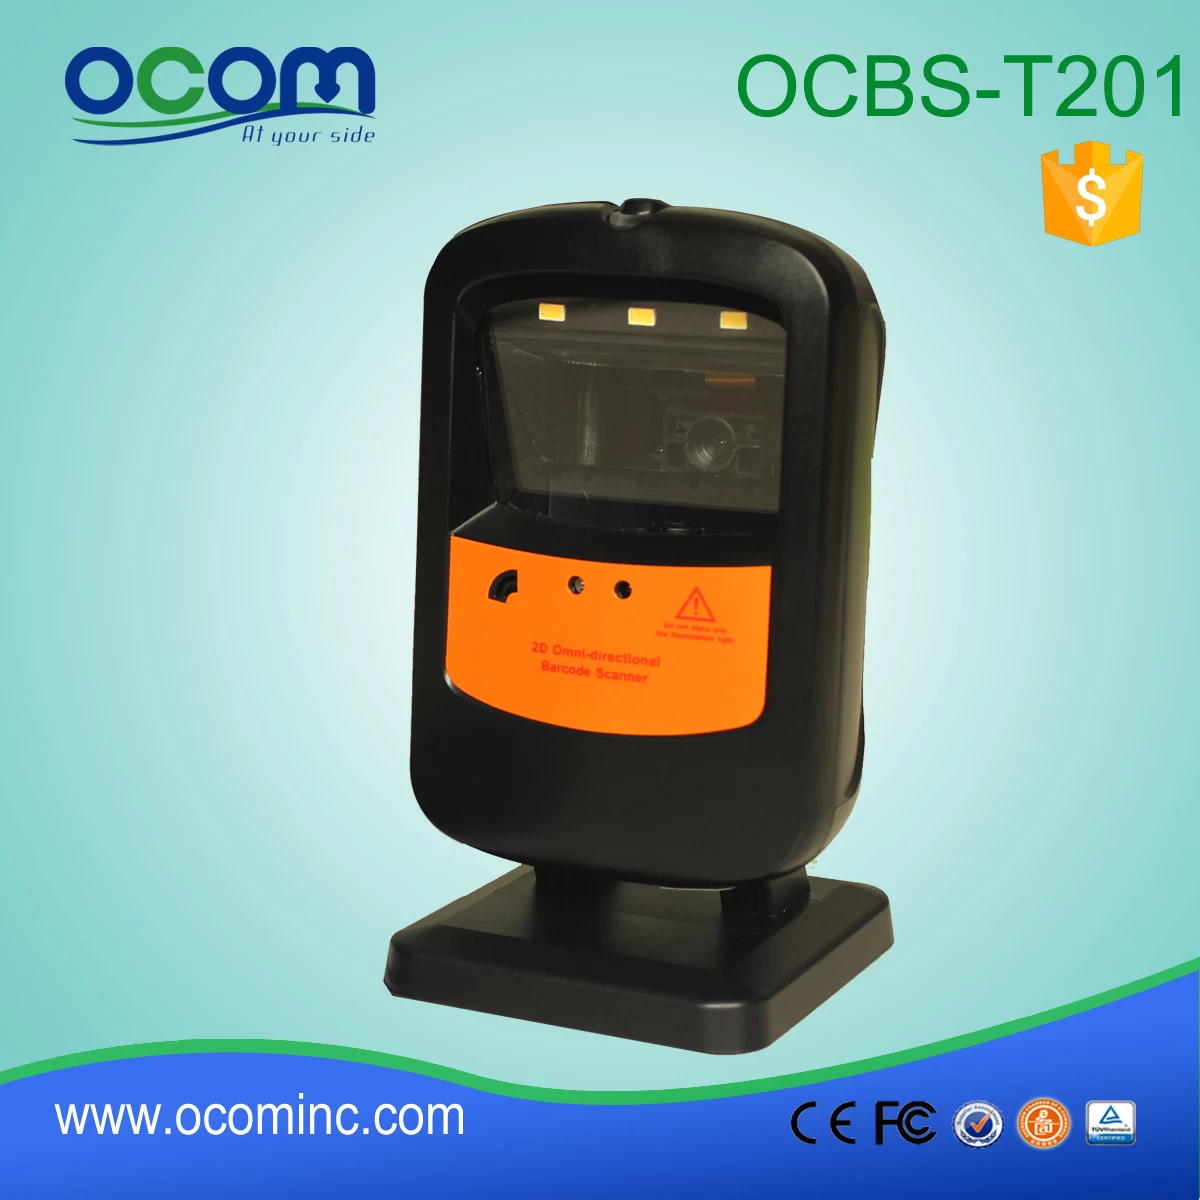 OCBS-T201:flatbed barcode scanner inventory, cheap barcode scanner